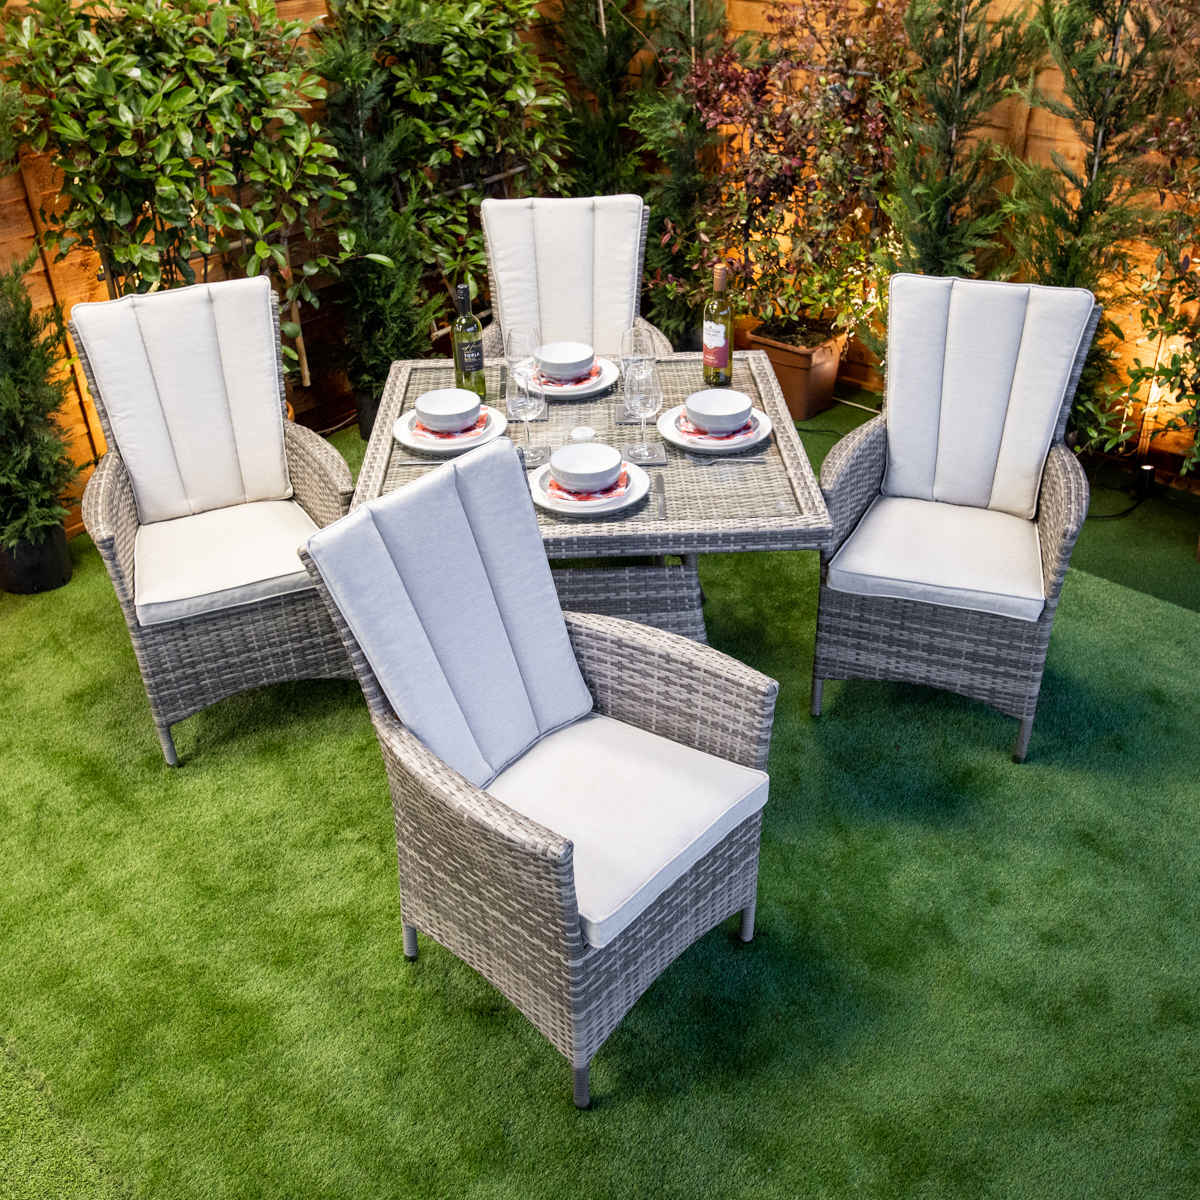 Rattan Furniture Placement Tips: Maximising Space in Small Gardens